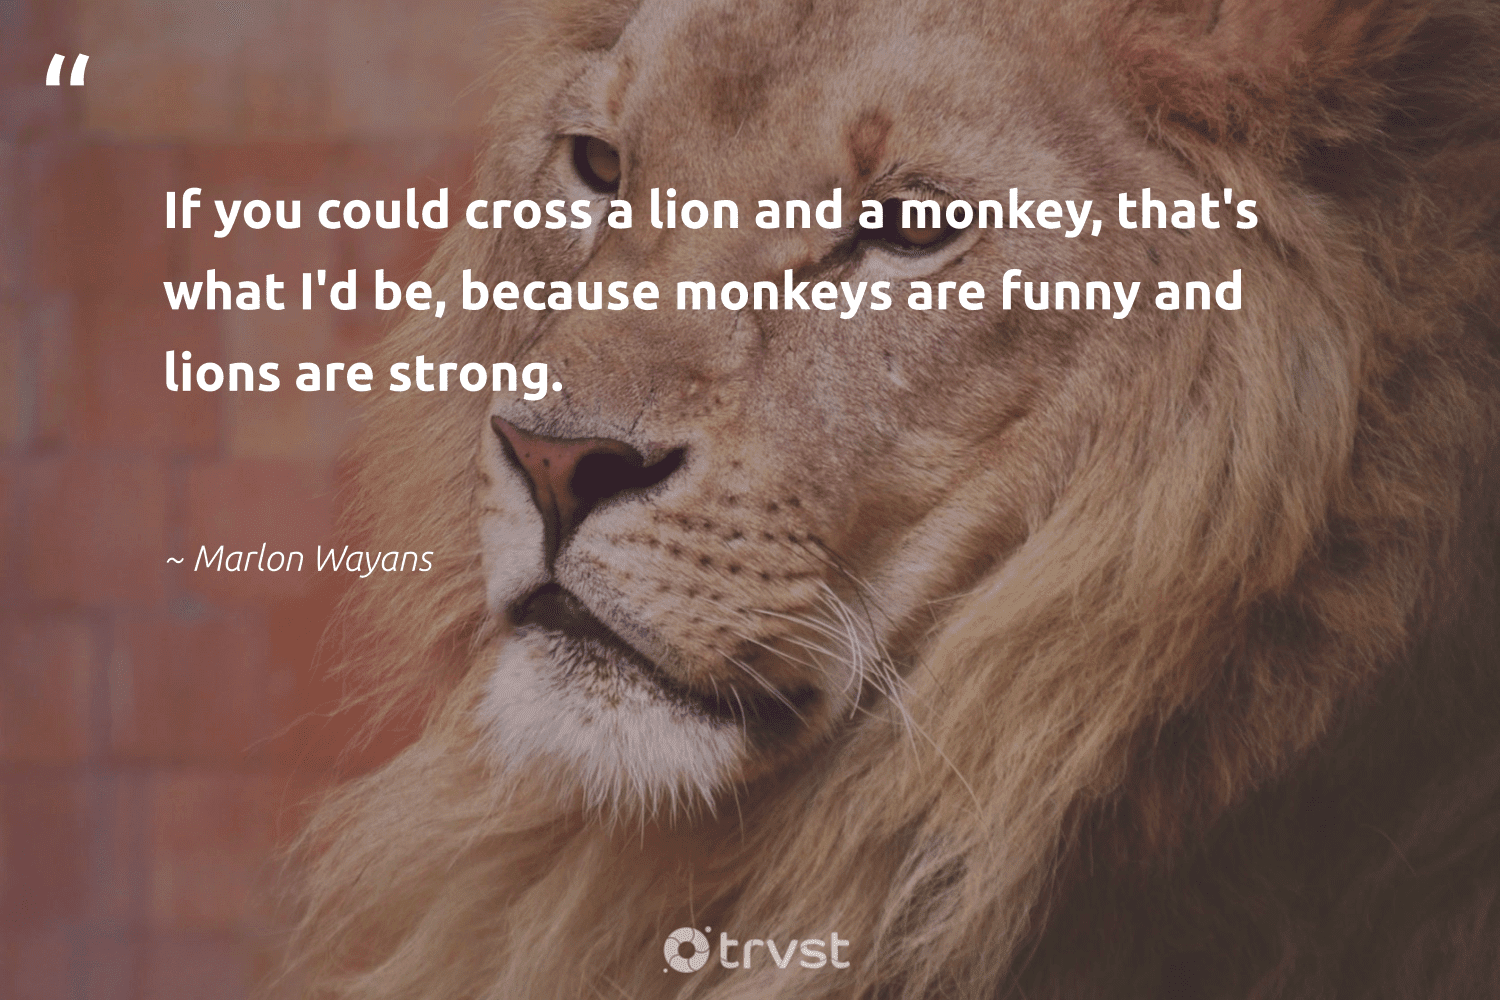 Lion Quotes - 42 Inspirational Lion Sayings & Famous Quotes - Page 2